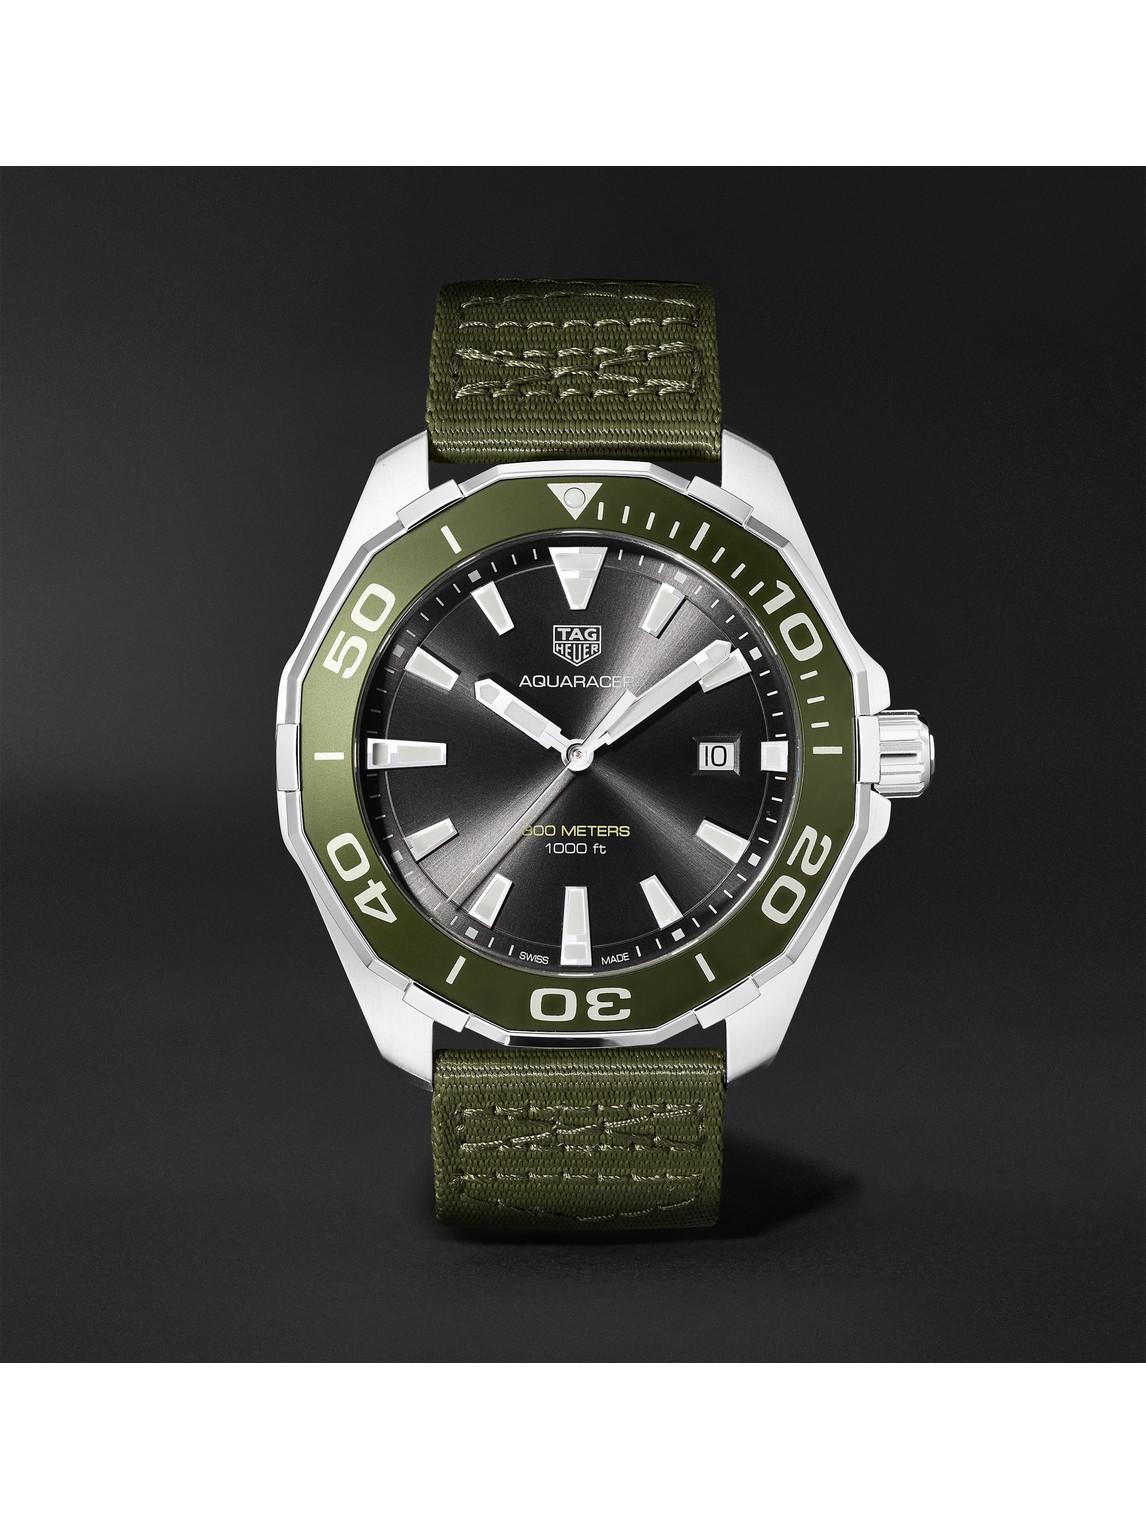  TAG Heuer Aquaracer Professional 300 Automatic Watch - Diameter  43 mm WBP201B.BA0632 : Clothing, Shoes & Jewelry